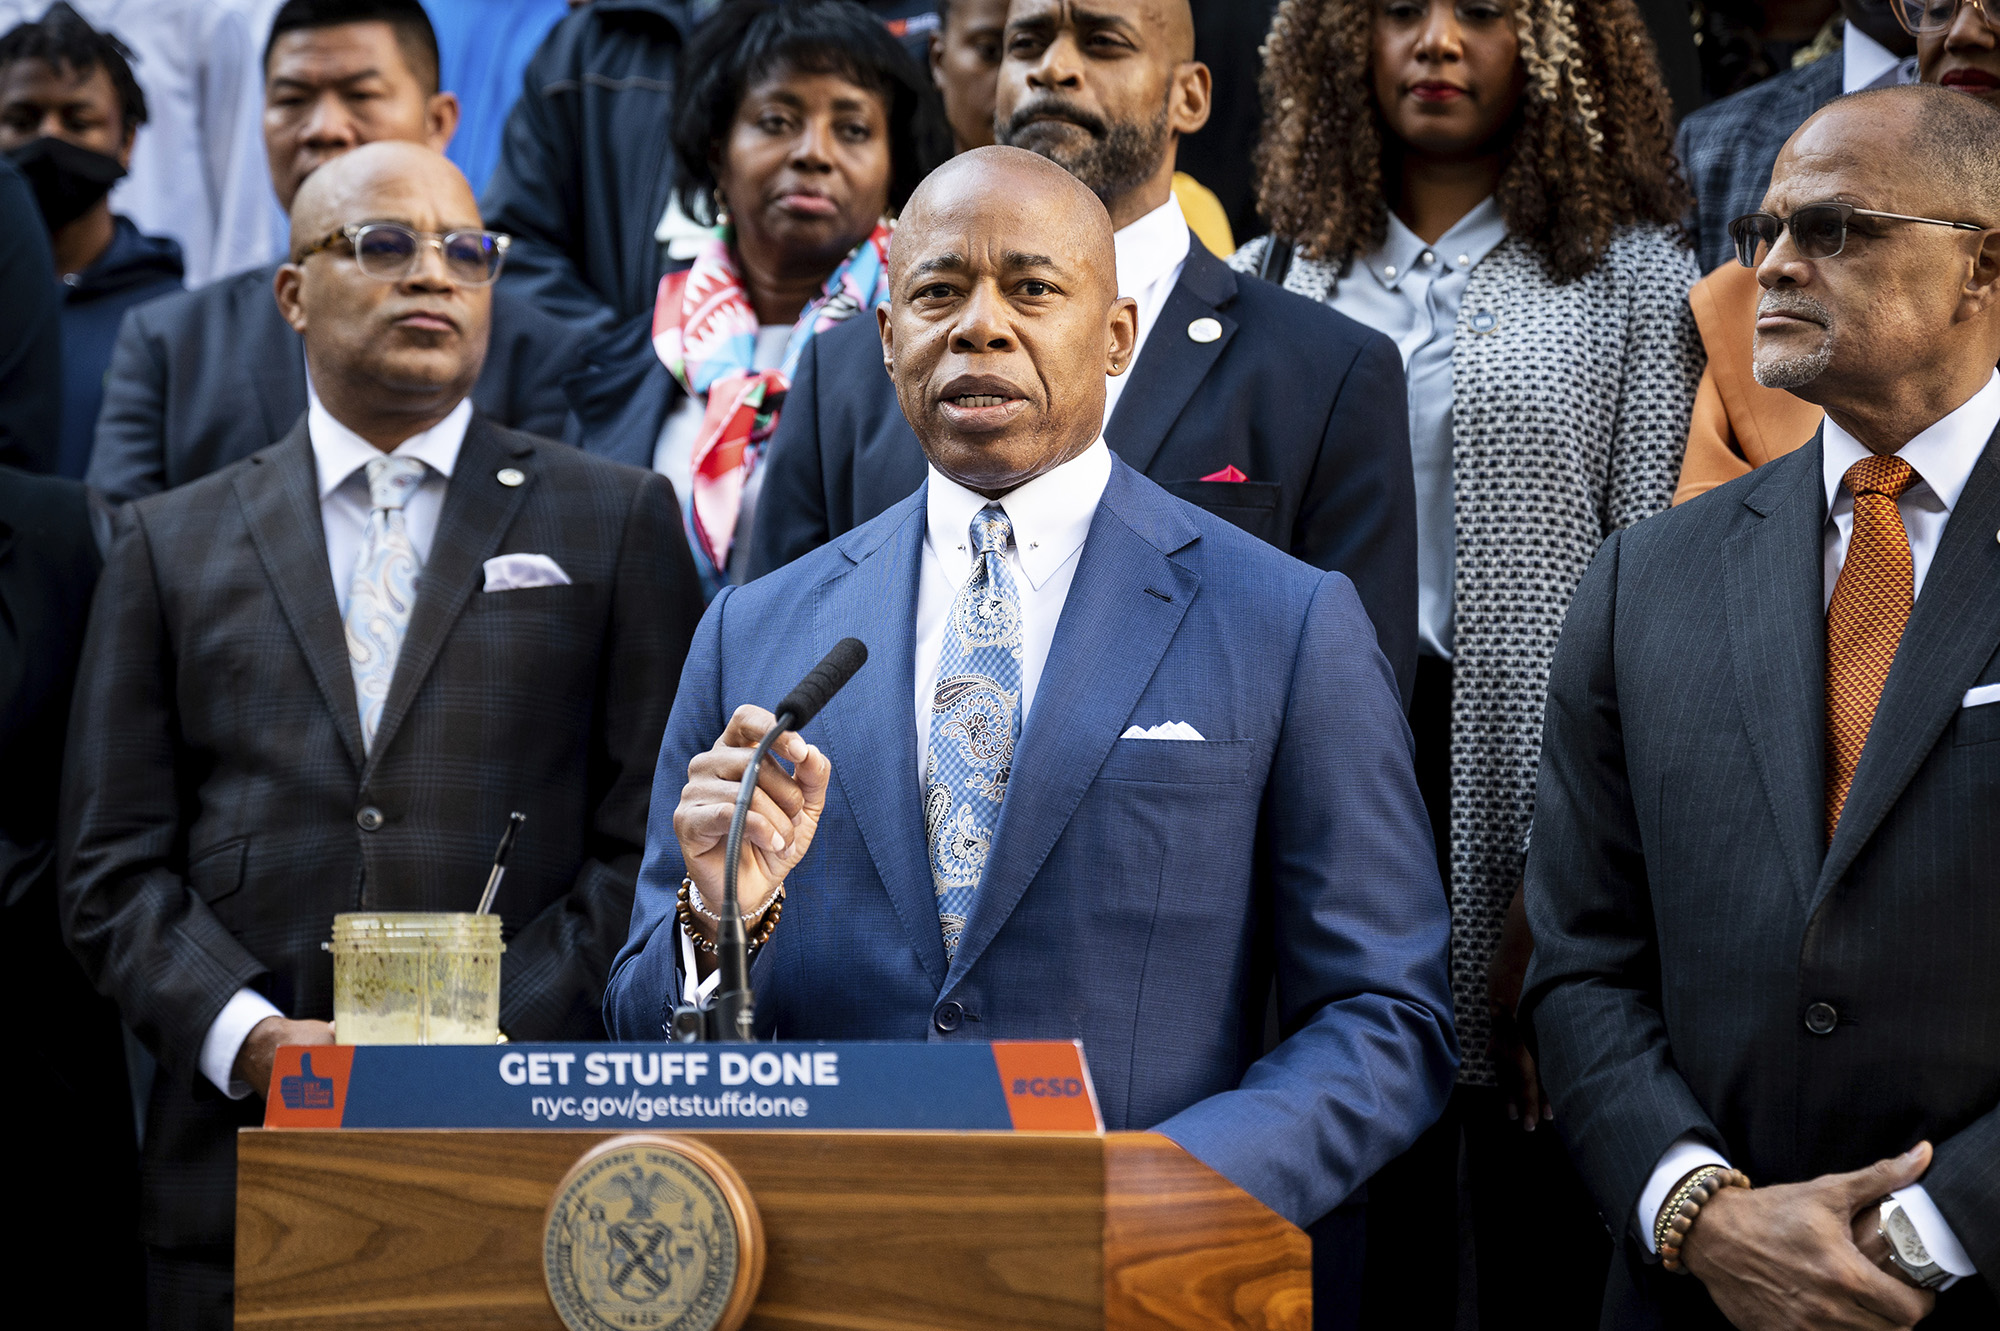 New York City Mayor Eric Adams (D) speaking at a press conference in front of the Tweed Courthouse ...